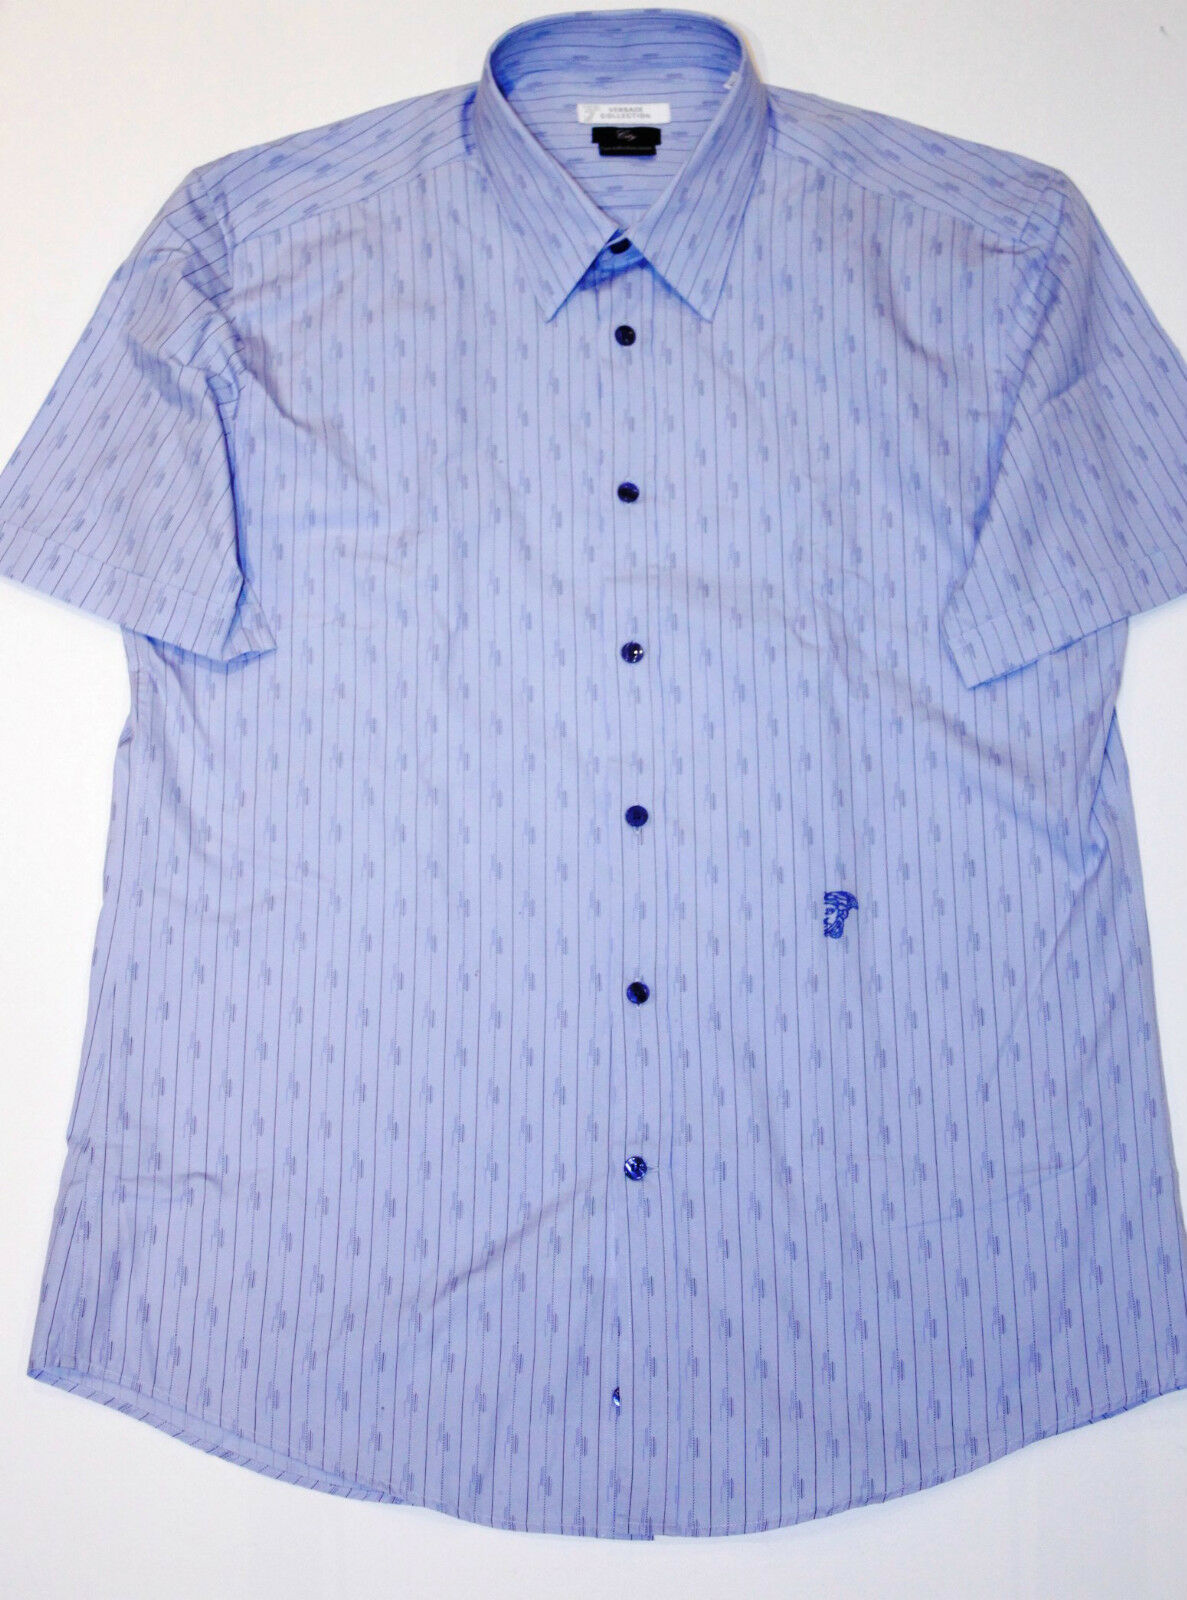 Primary image for VERSACE COLLECTION  City LIGHT BLUE Short Sleeve MEDUSA Embroidered STRIPE Shirt